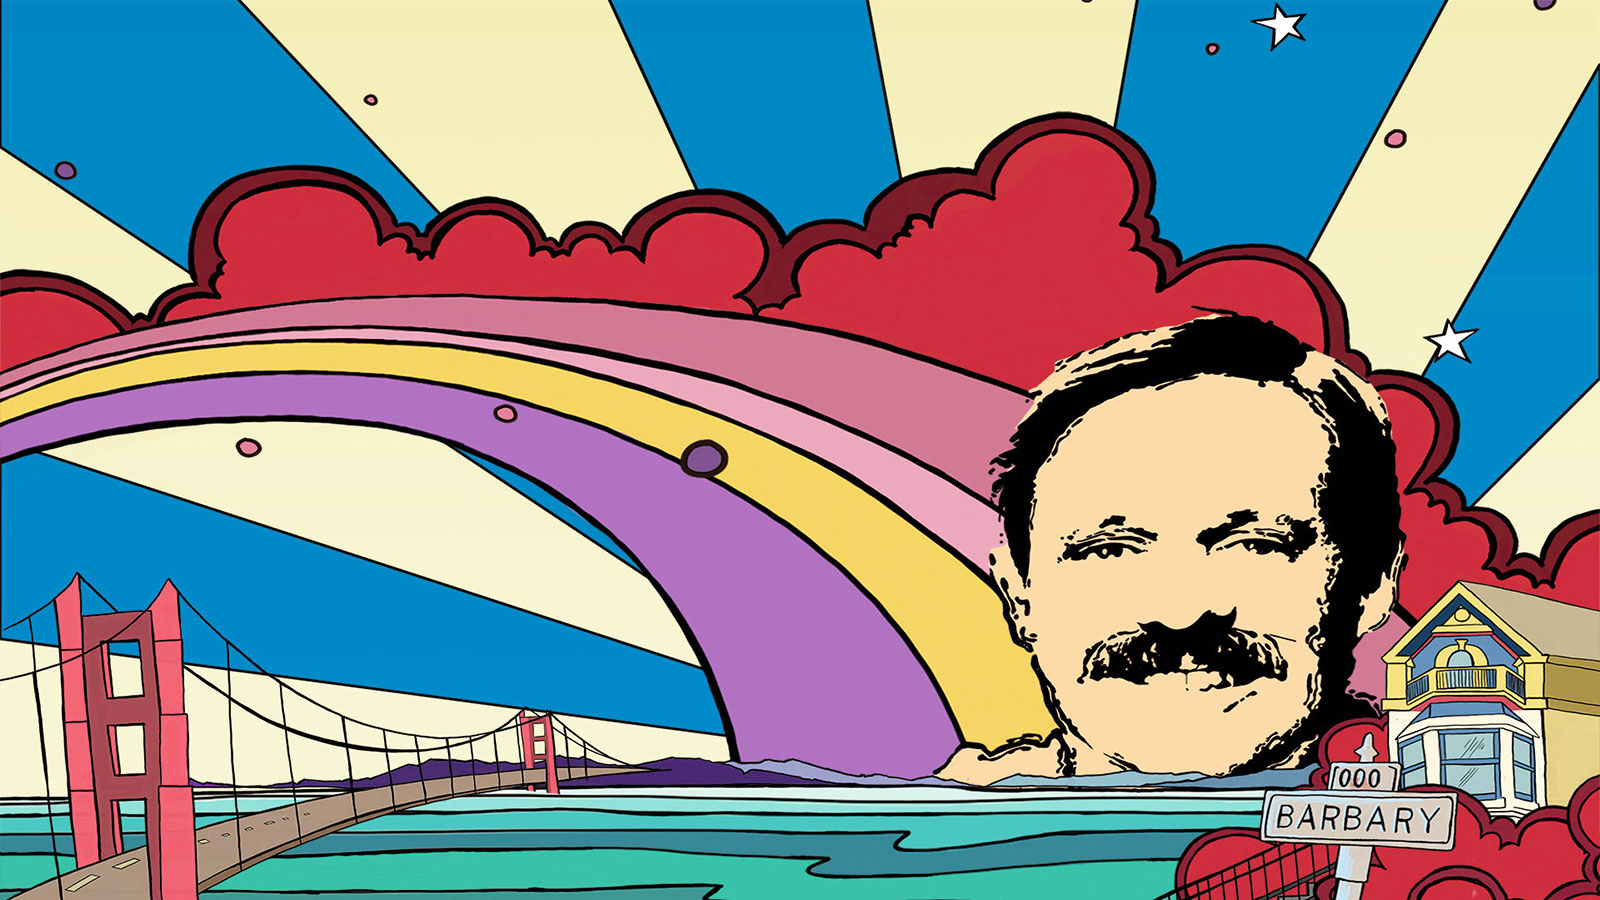 Graphic of a bridge over the ocean. The sky is blue and white striped and a rainbow that ends at a house is purple, yellow, pink and red. A man's mustached face is in front of the house.